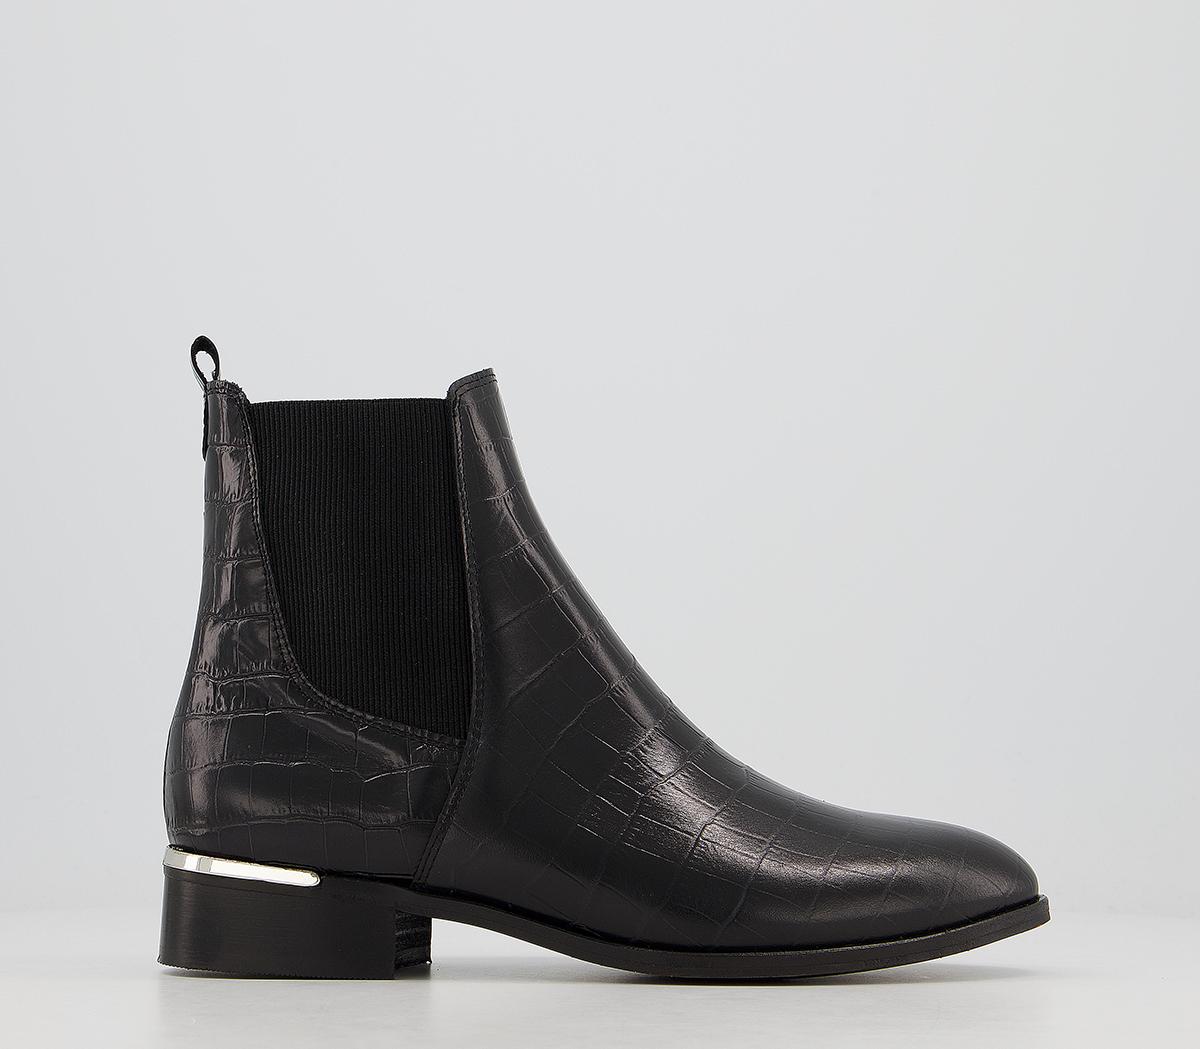 OFFICEAnika Smart Chelsea Boots With Metal ClipBlack Croc Leather